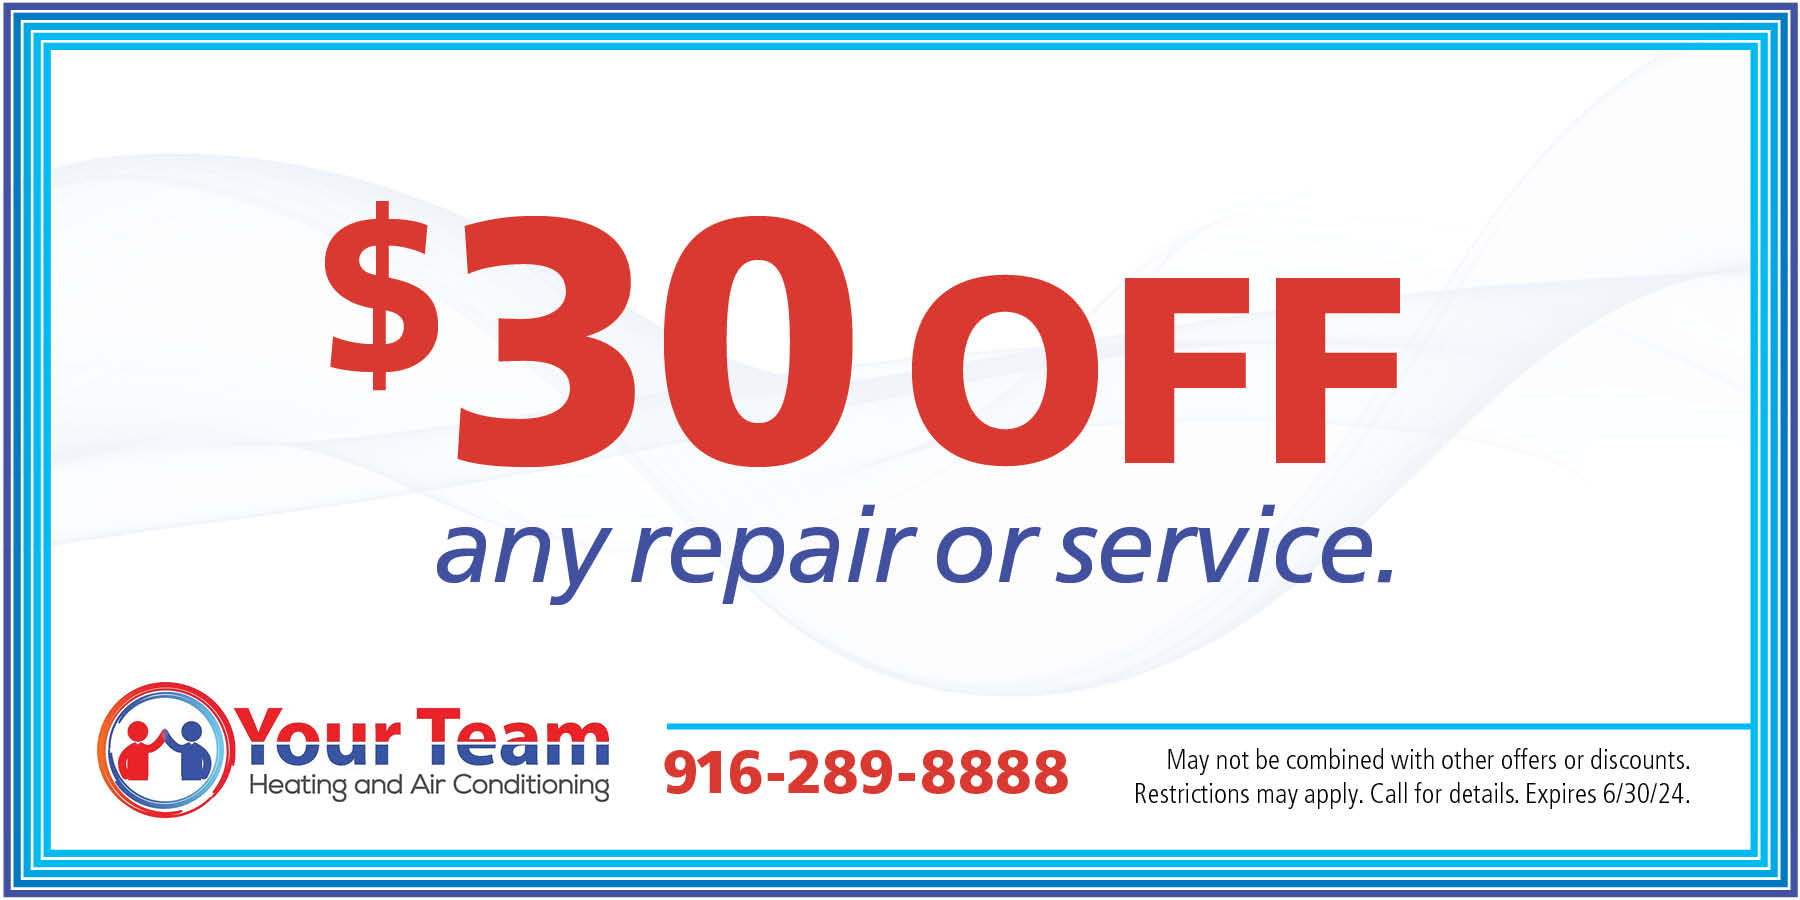 $30 off any repair or service.